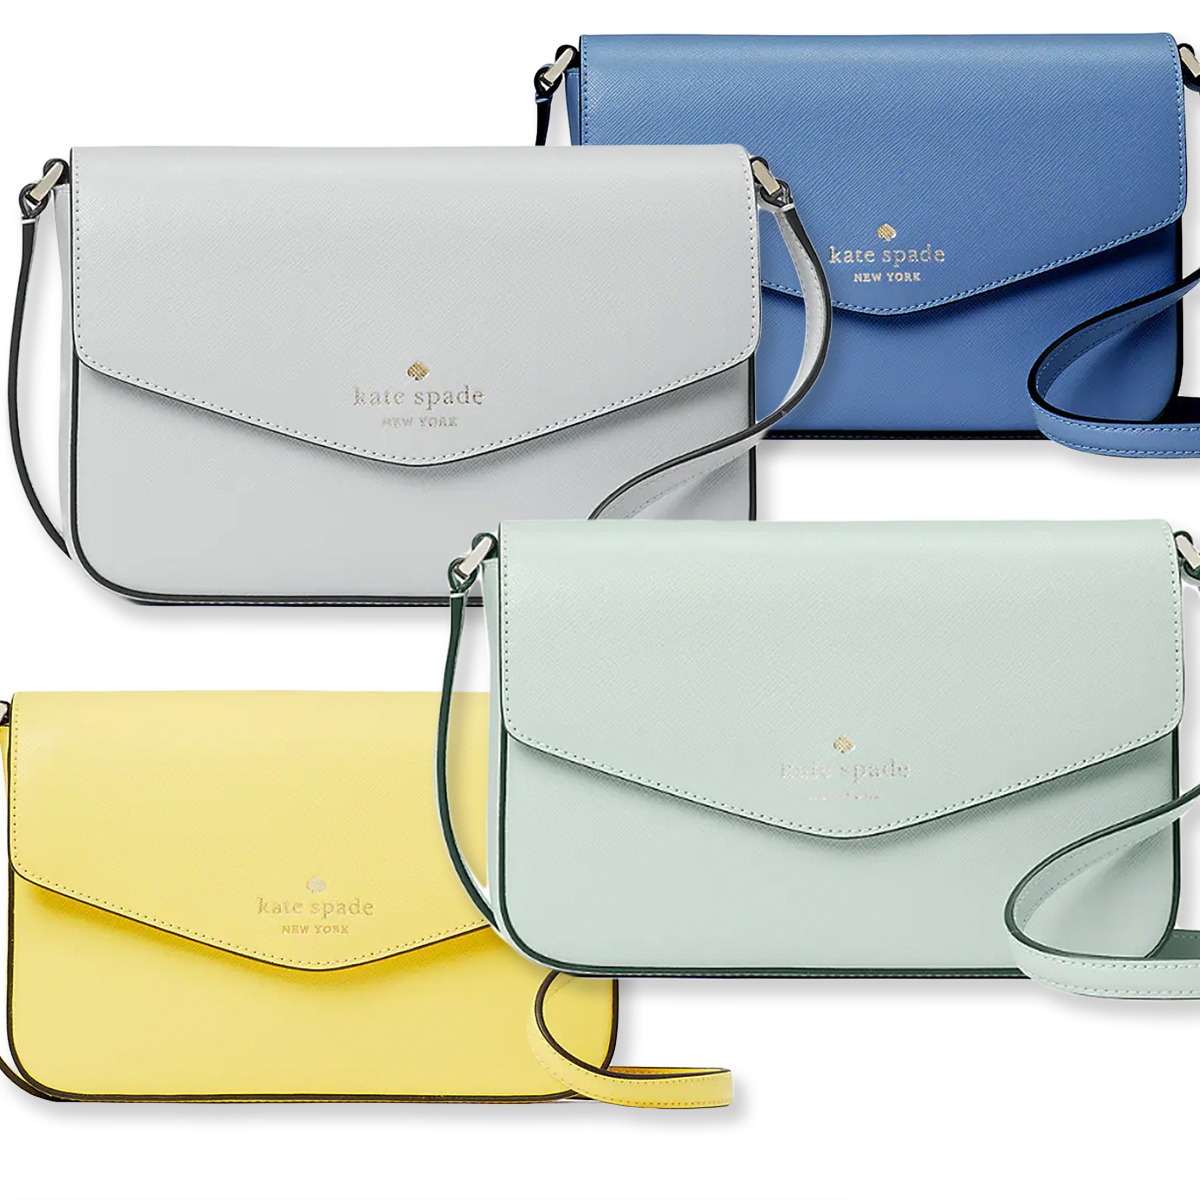 Kate Spade 24-Hour Flash Deal: Get a $280 Crossbody Bag for Just $71